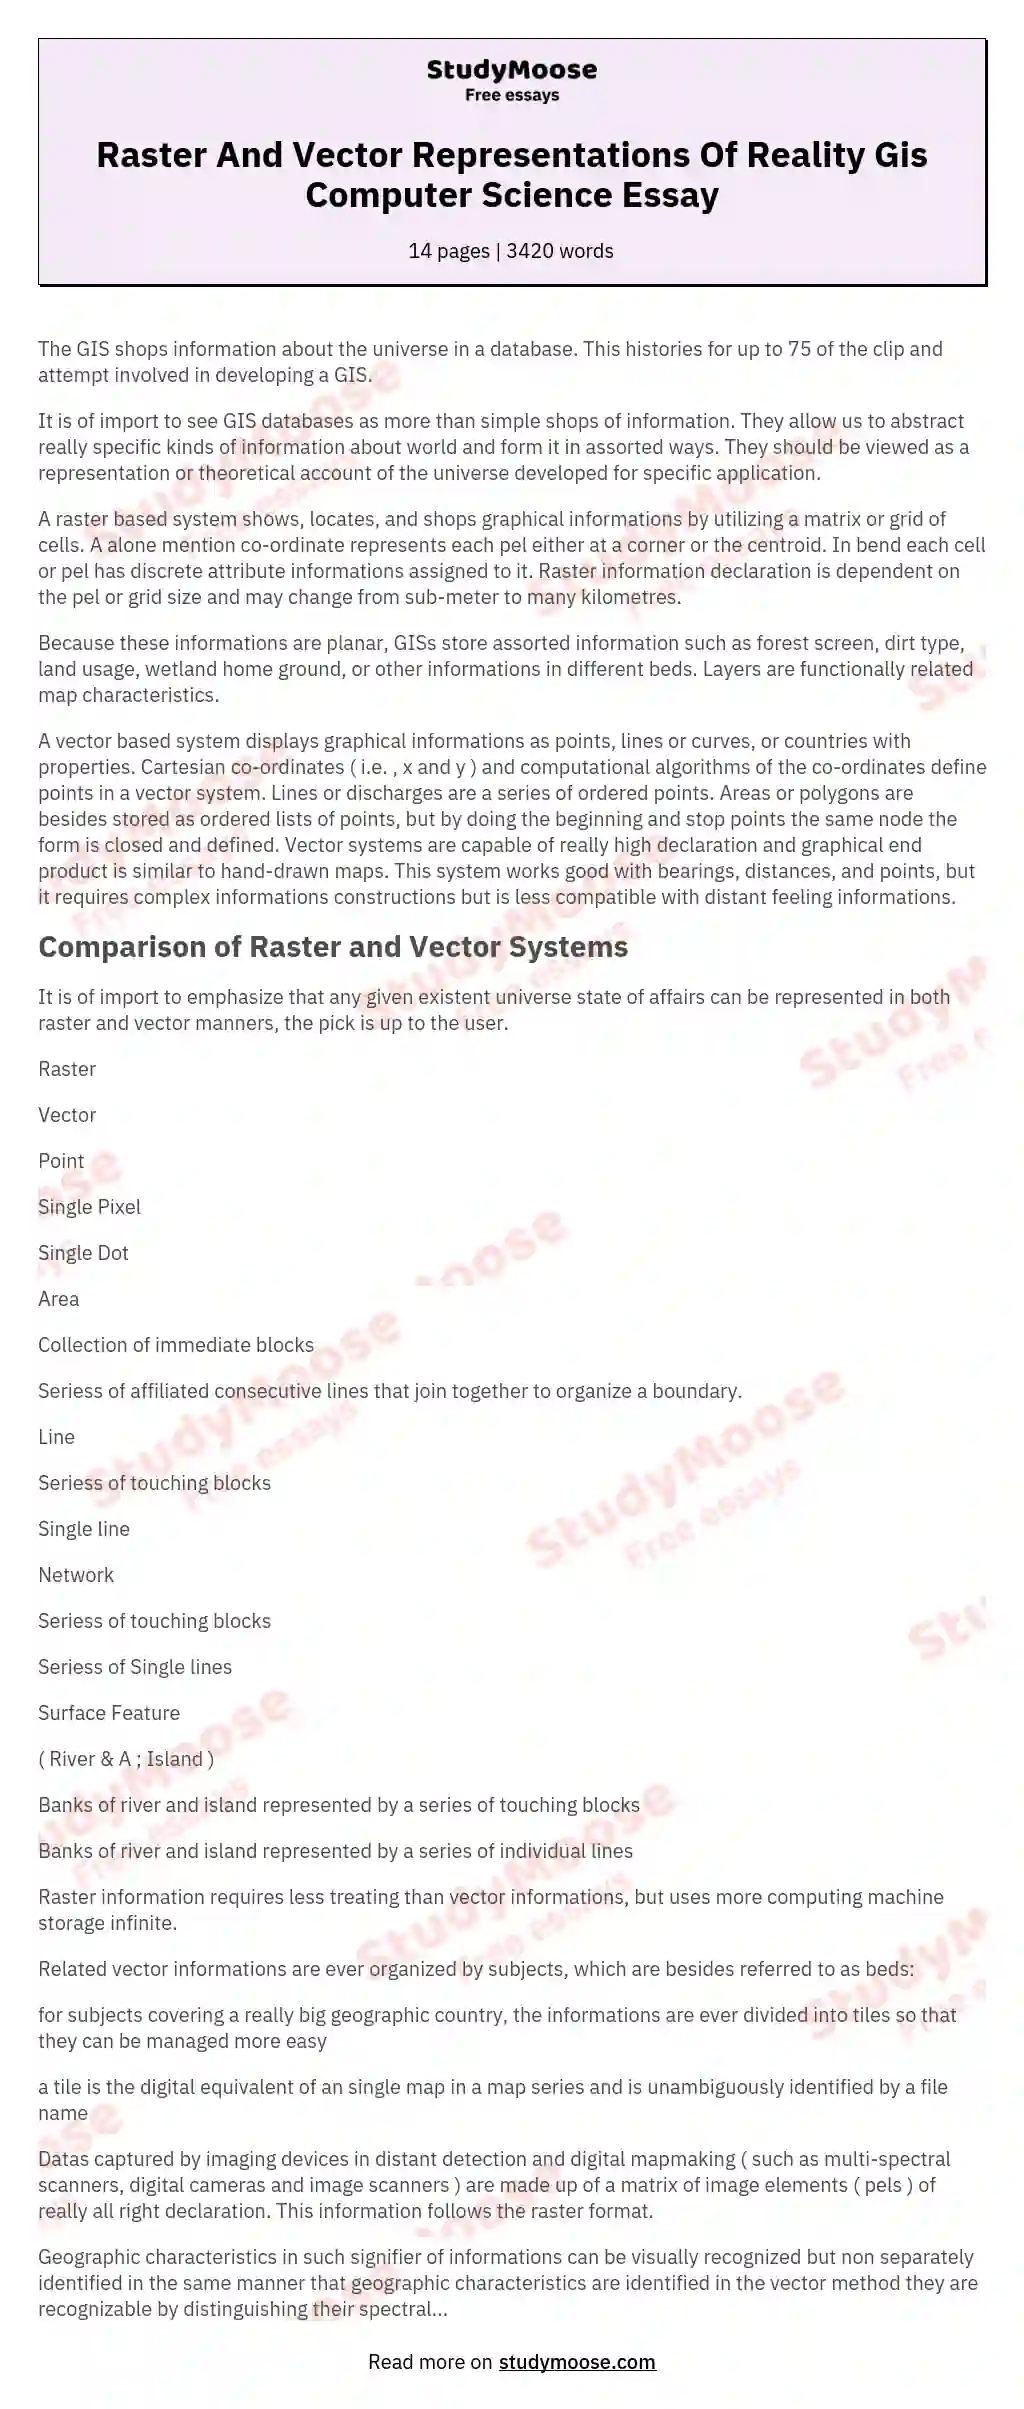 Raster And Vector Representations Of Reality Gis Computer Science Essay essay